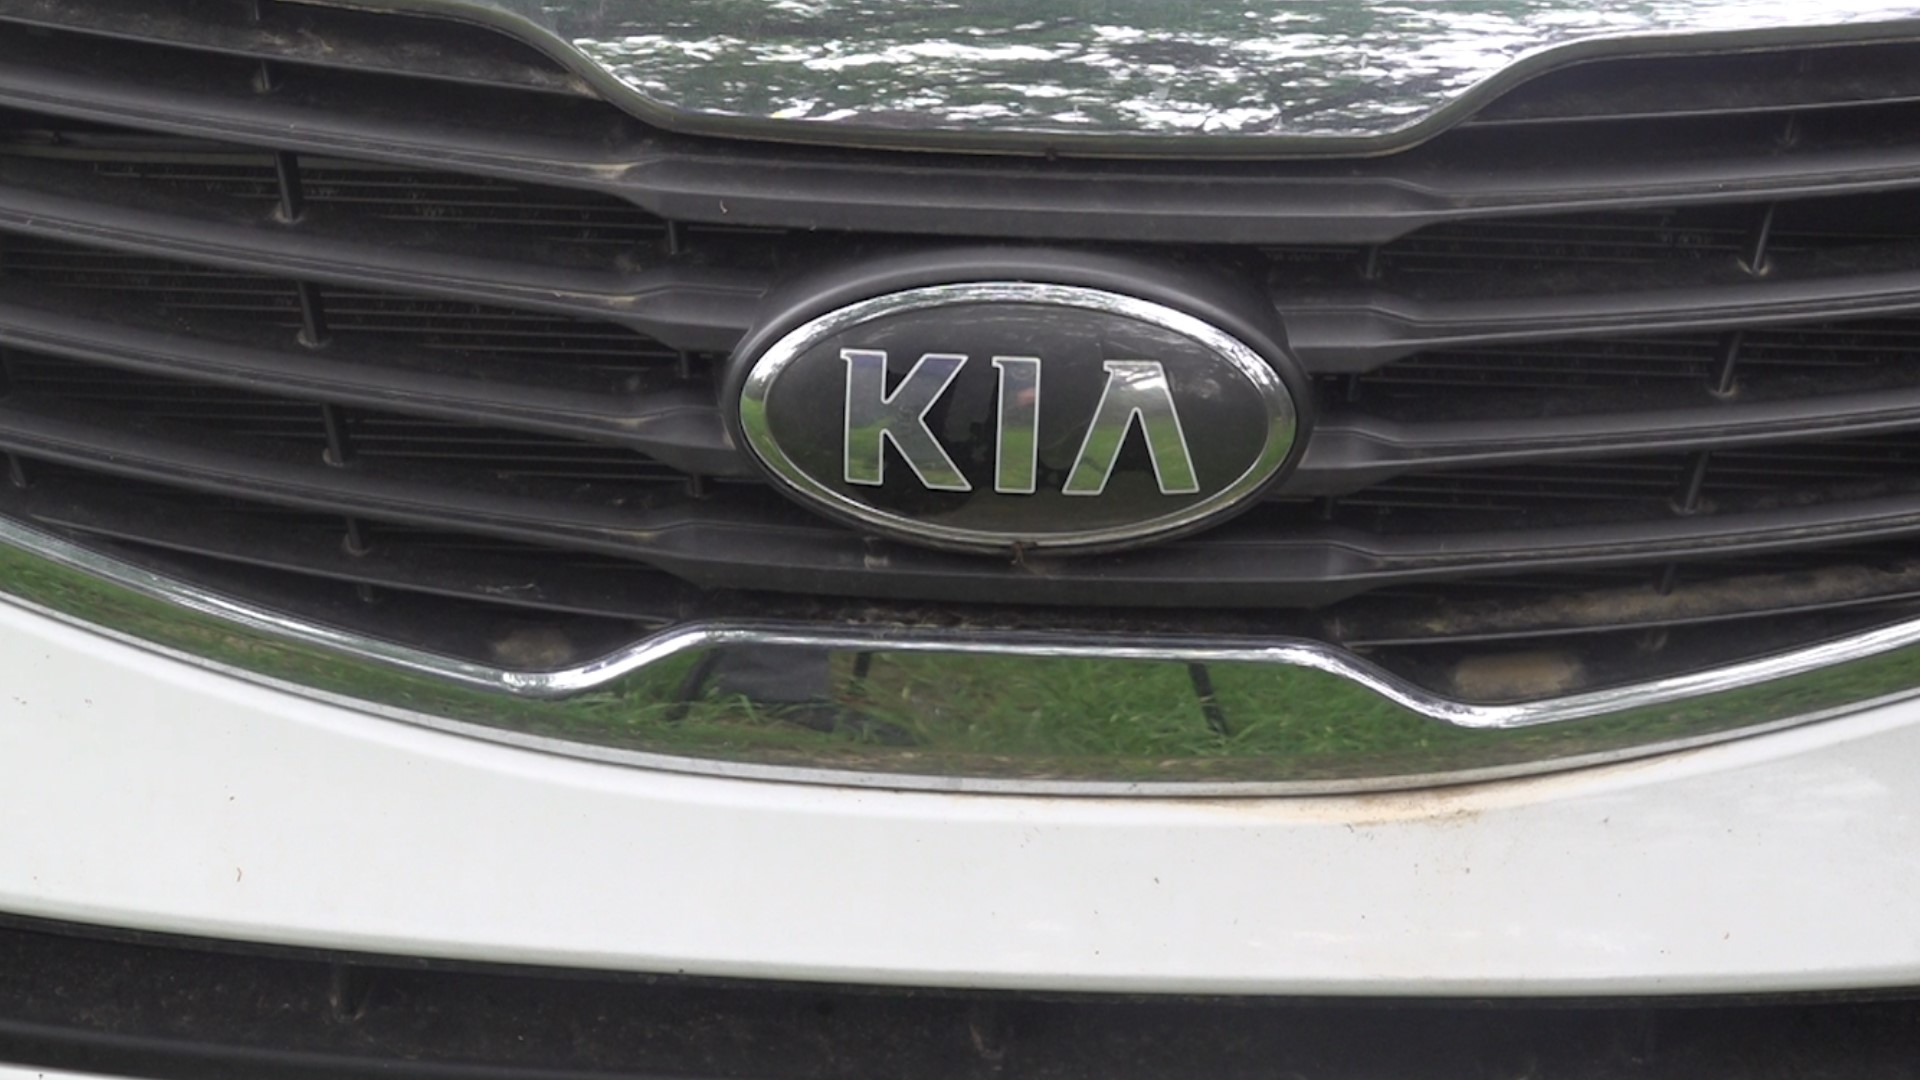 Jane Kidder got a recall notice for her Kia Sportage in November of 2023 which said it could catch fire. She’s still waiting for Kia to fix it.